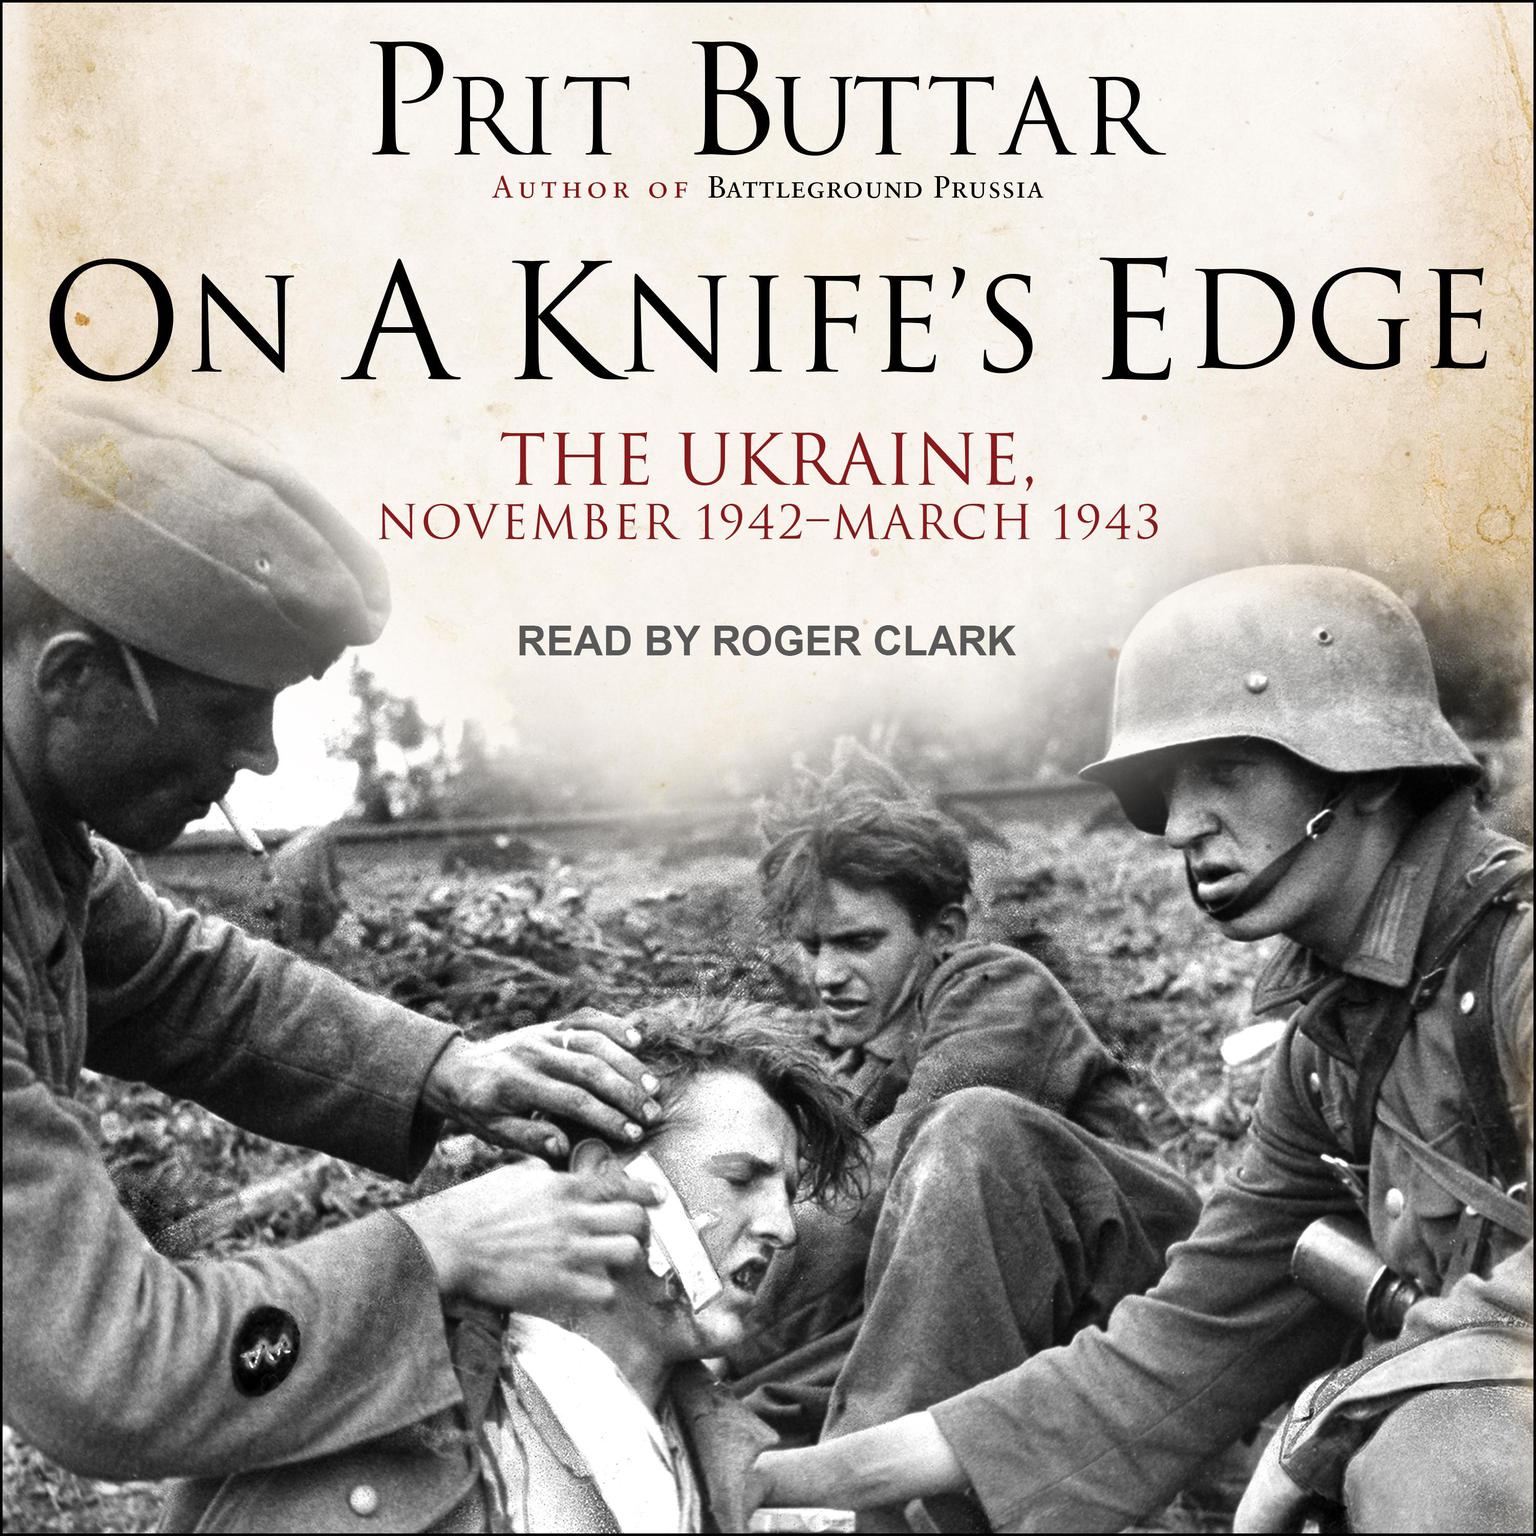 On a Knife’s Edge: The Ukraine, November 1942-March 1943 Audiobook, by Prit Buttar